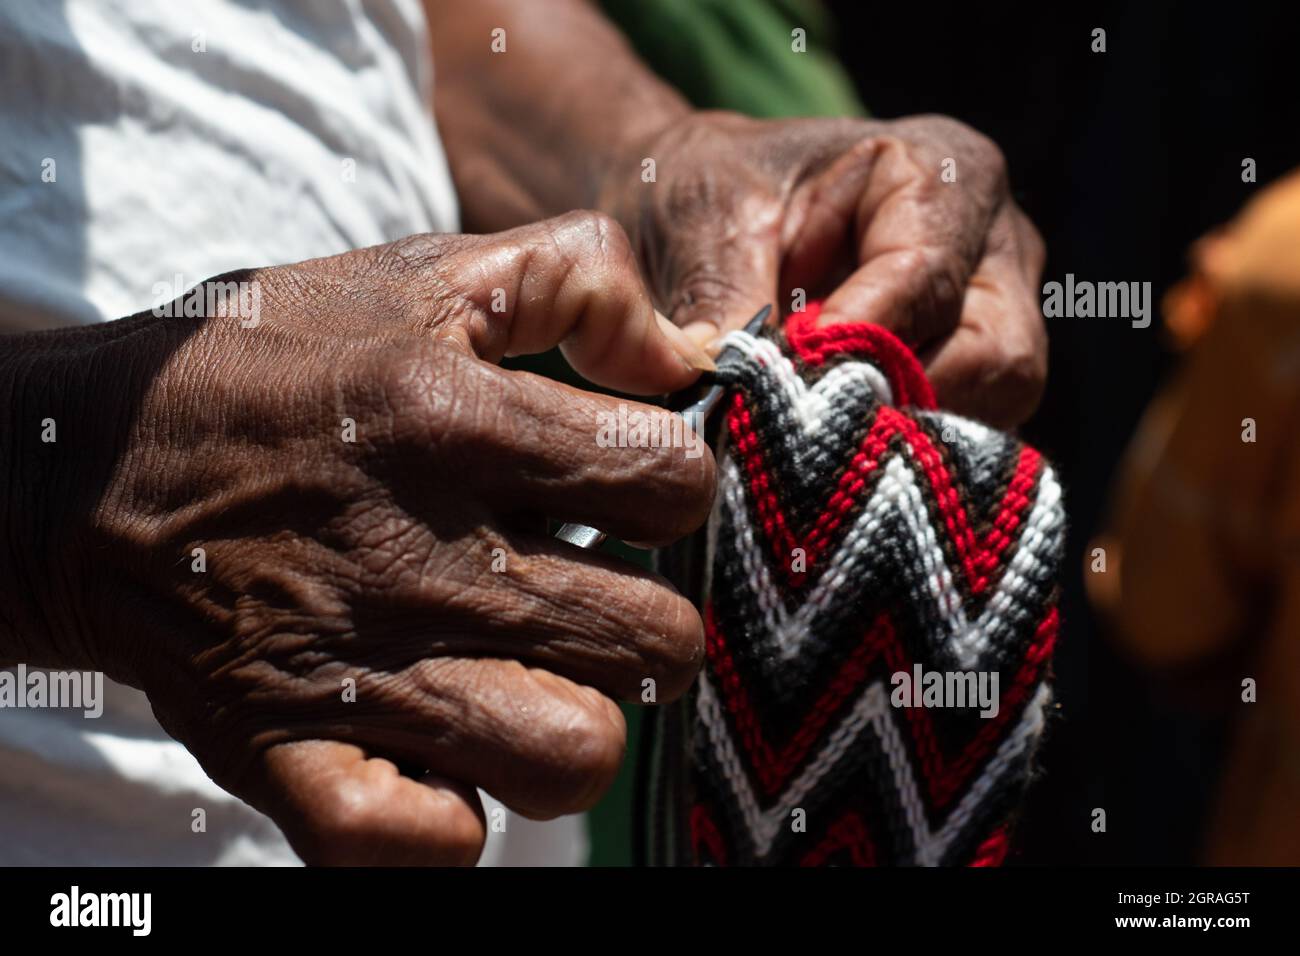 Mayapo, Colombia. 26th Sep, 2021. A Wayuu indigenous community member knits a traditional Wayuu backpack during a Humanitarian Mission developed by 'De Corazon Guajira' in Mayapo at La Guajira - Colombia were they visited the Wayuu indigenous communities 'Pactalia, Poromana, Perrohuila' on September 26, 2021. The Guajira region in Colombia is the poorest region in Colombia, with its people commongly living without drinkable water, electricity and food. Credit: Long Visual Press/Alamy Live News Stock Photo